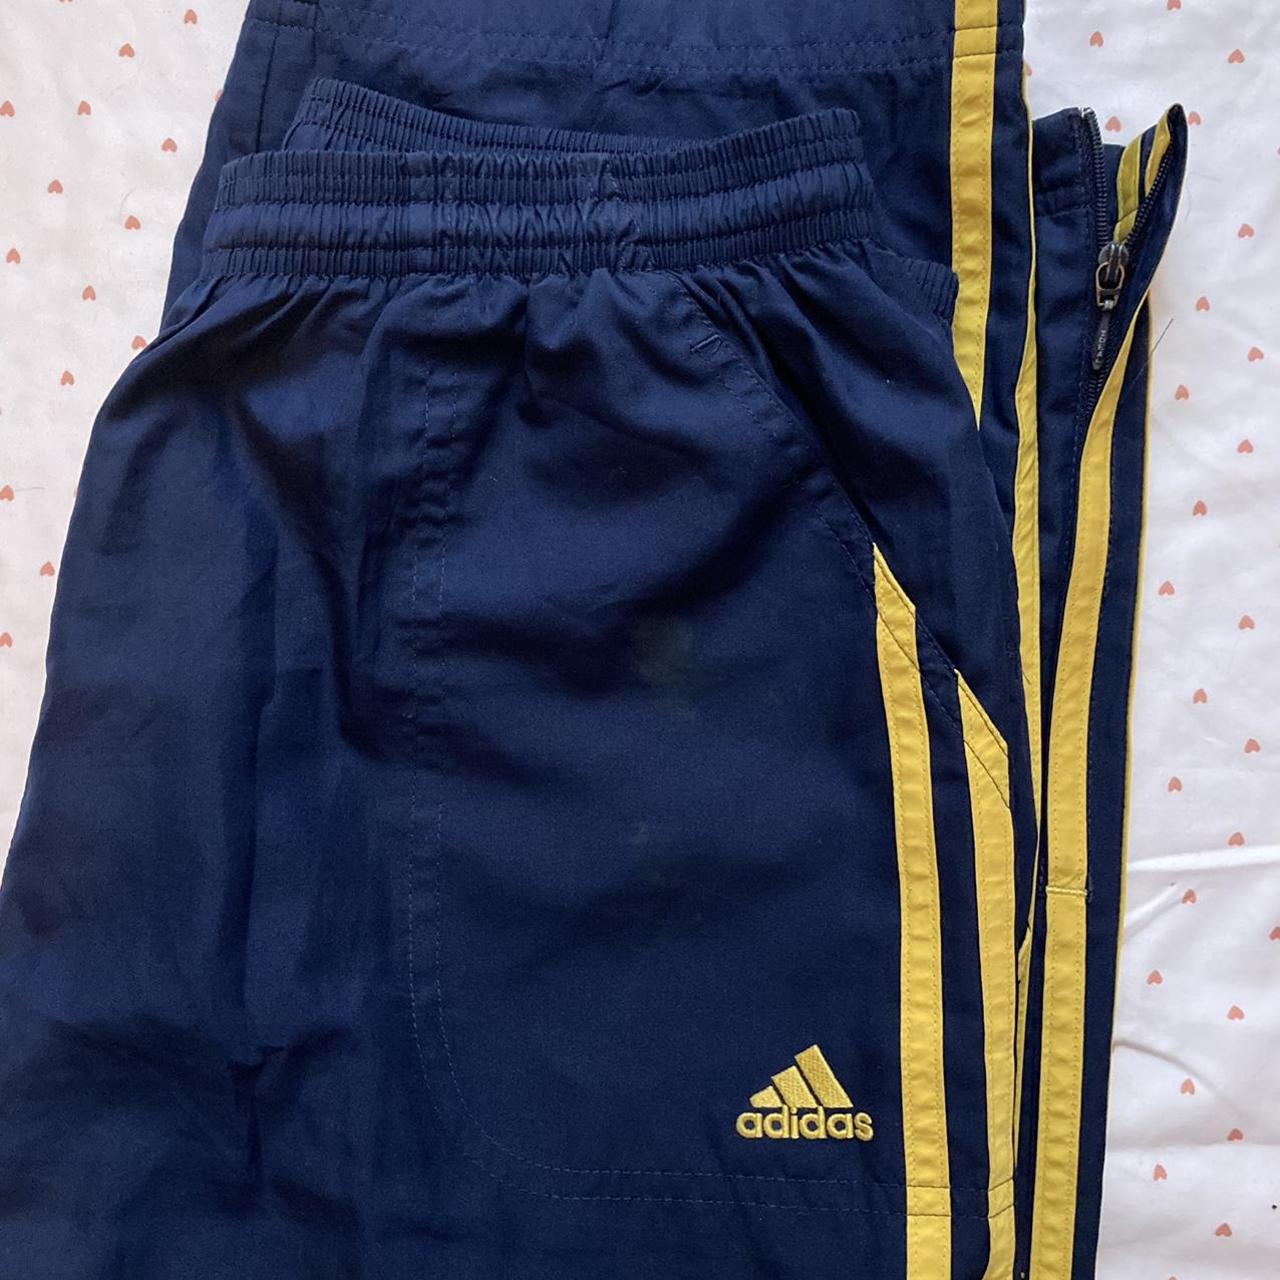 Adidas Navy and Yellow Joggers-tracksuits | Depop